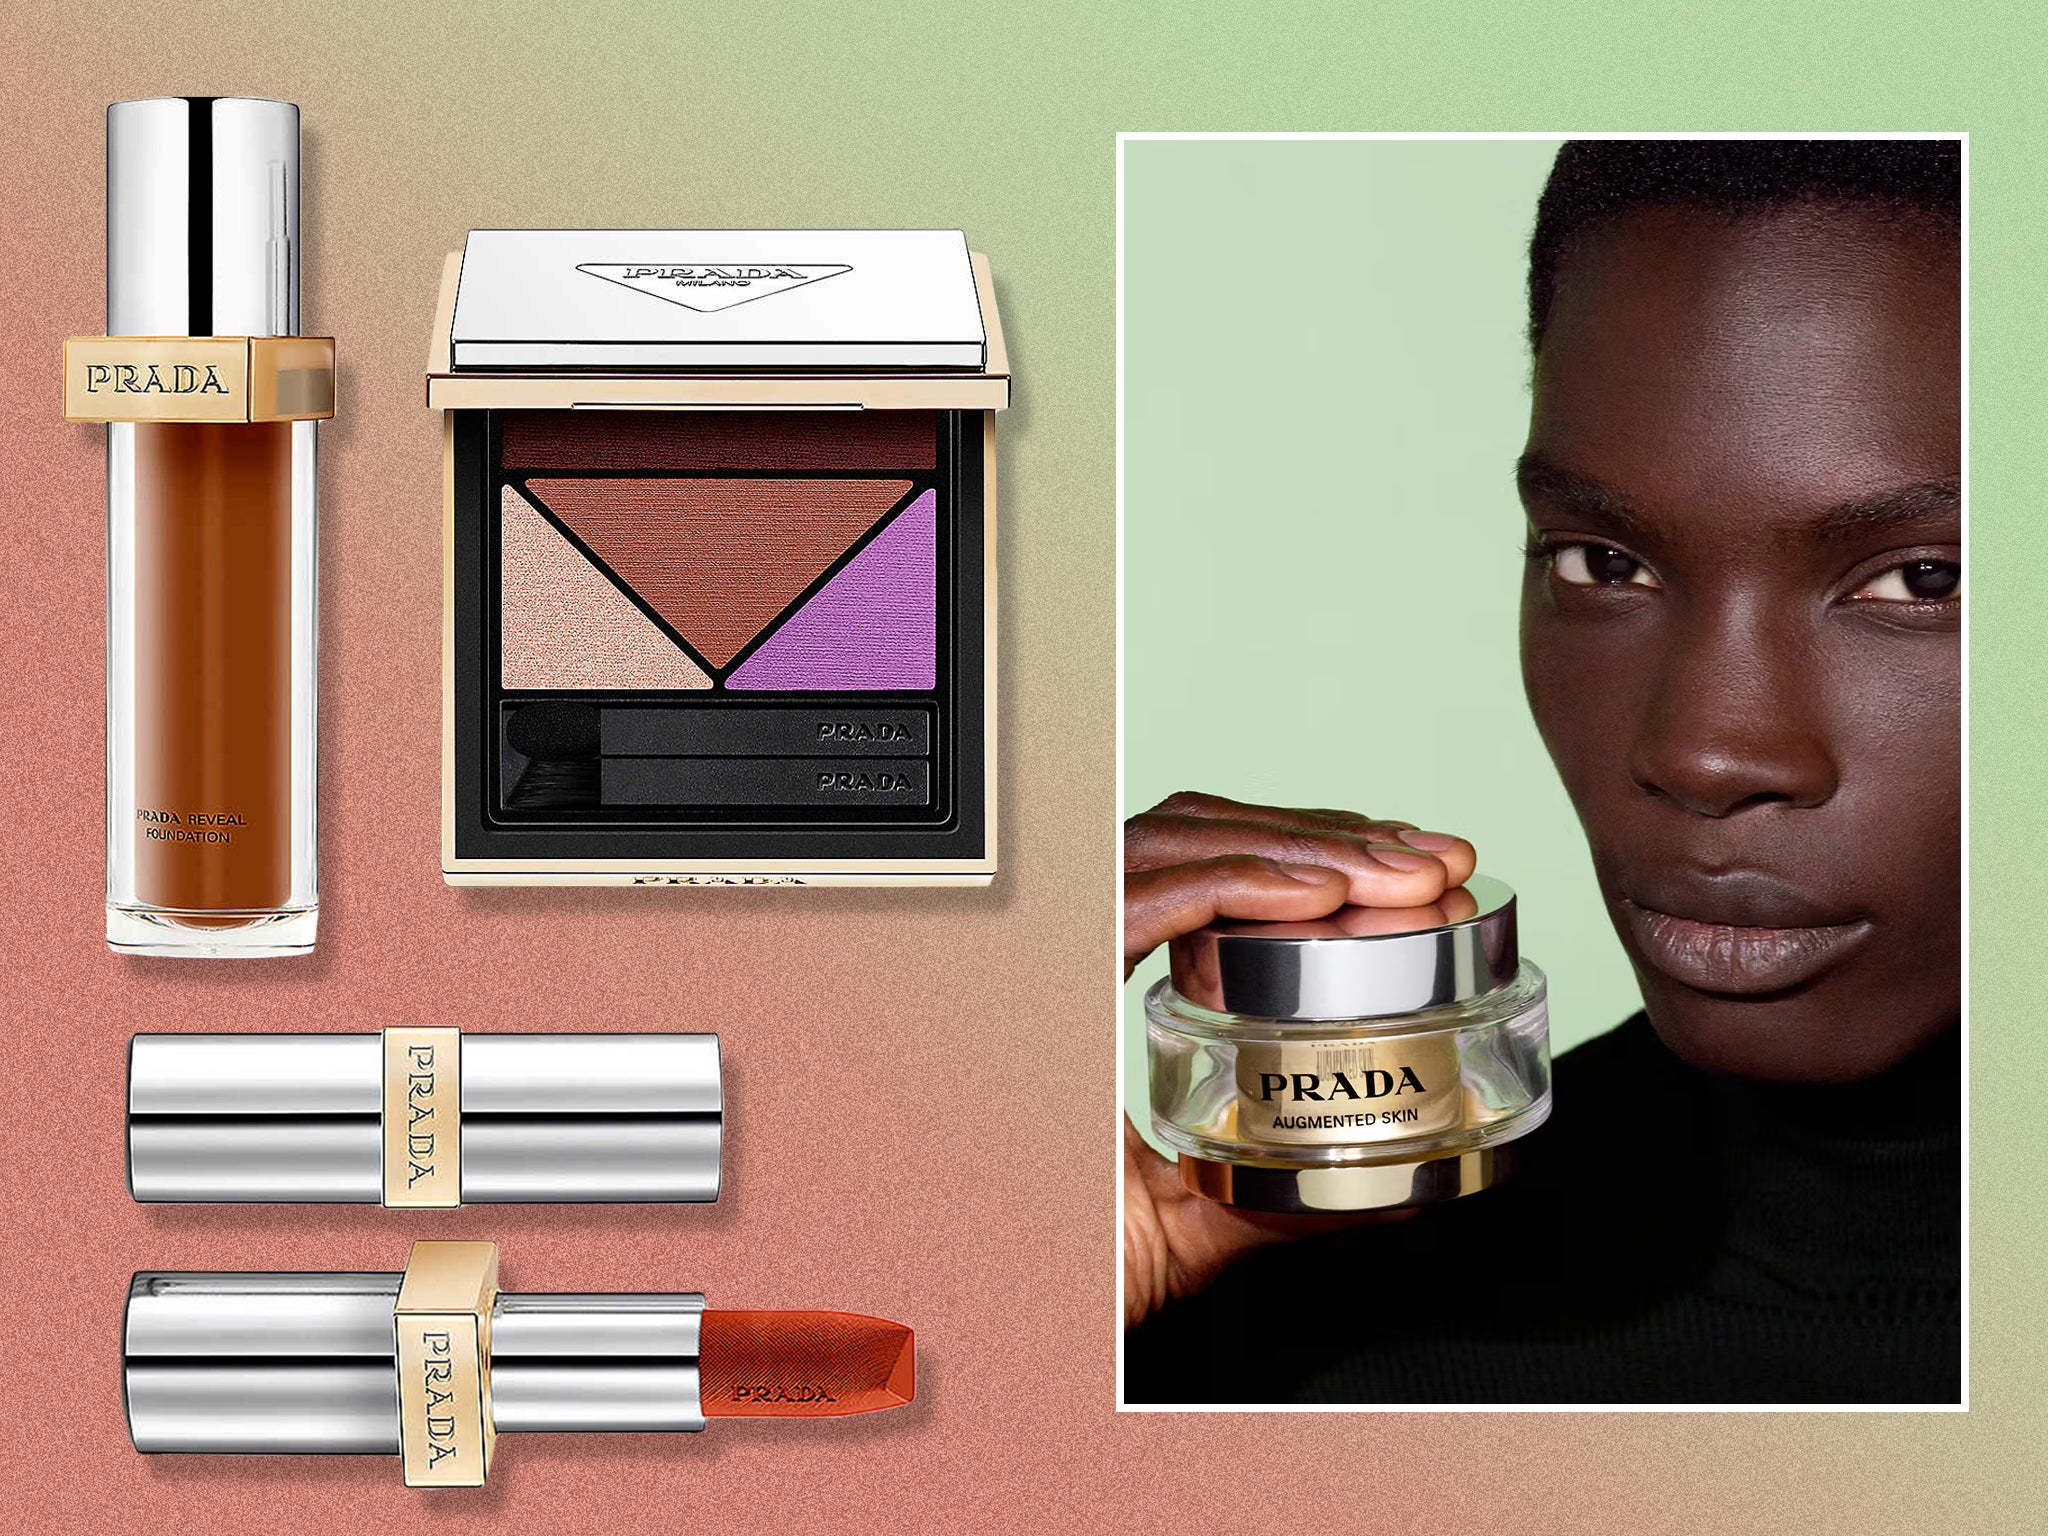 Prada Beauty is finally here, featuring everything from lipsticks to serums